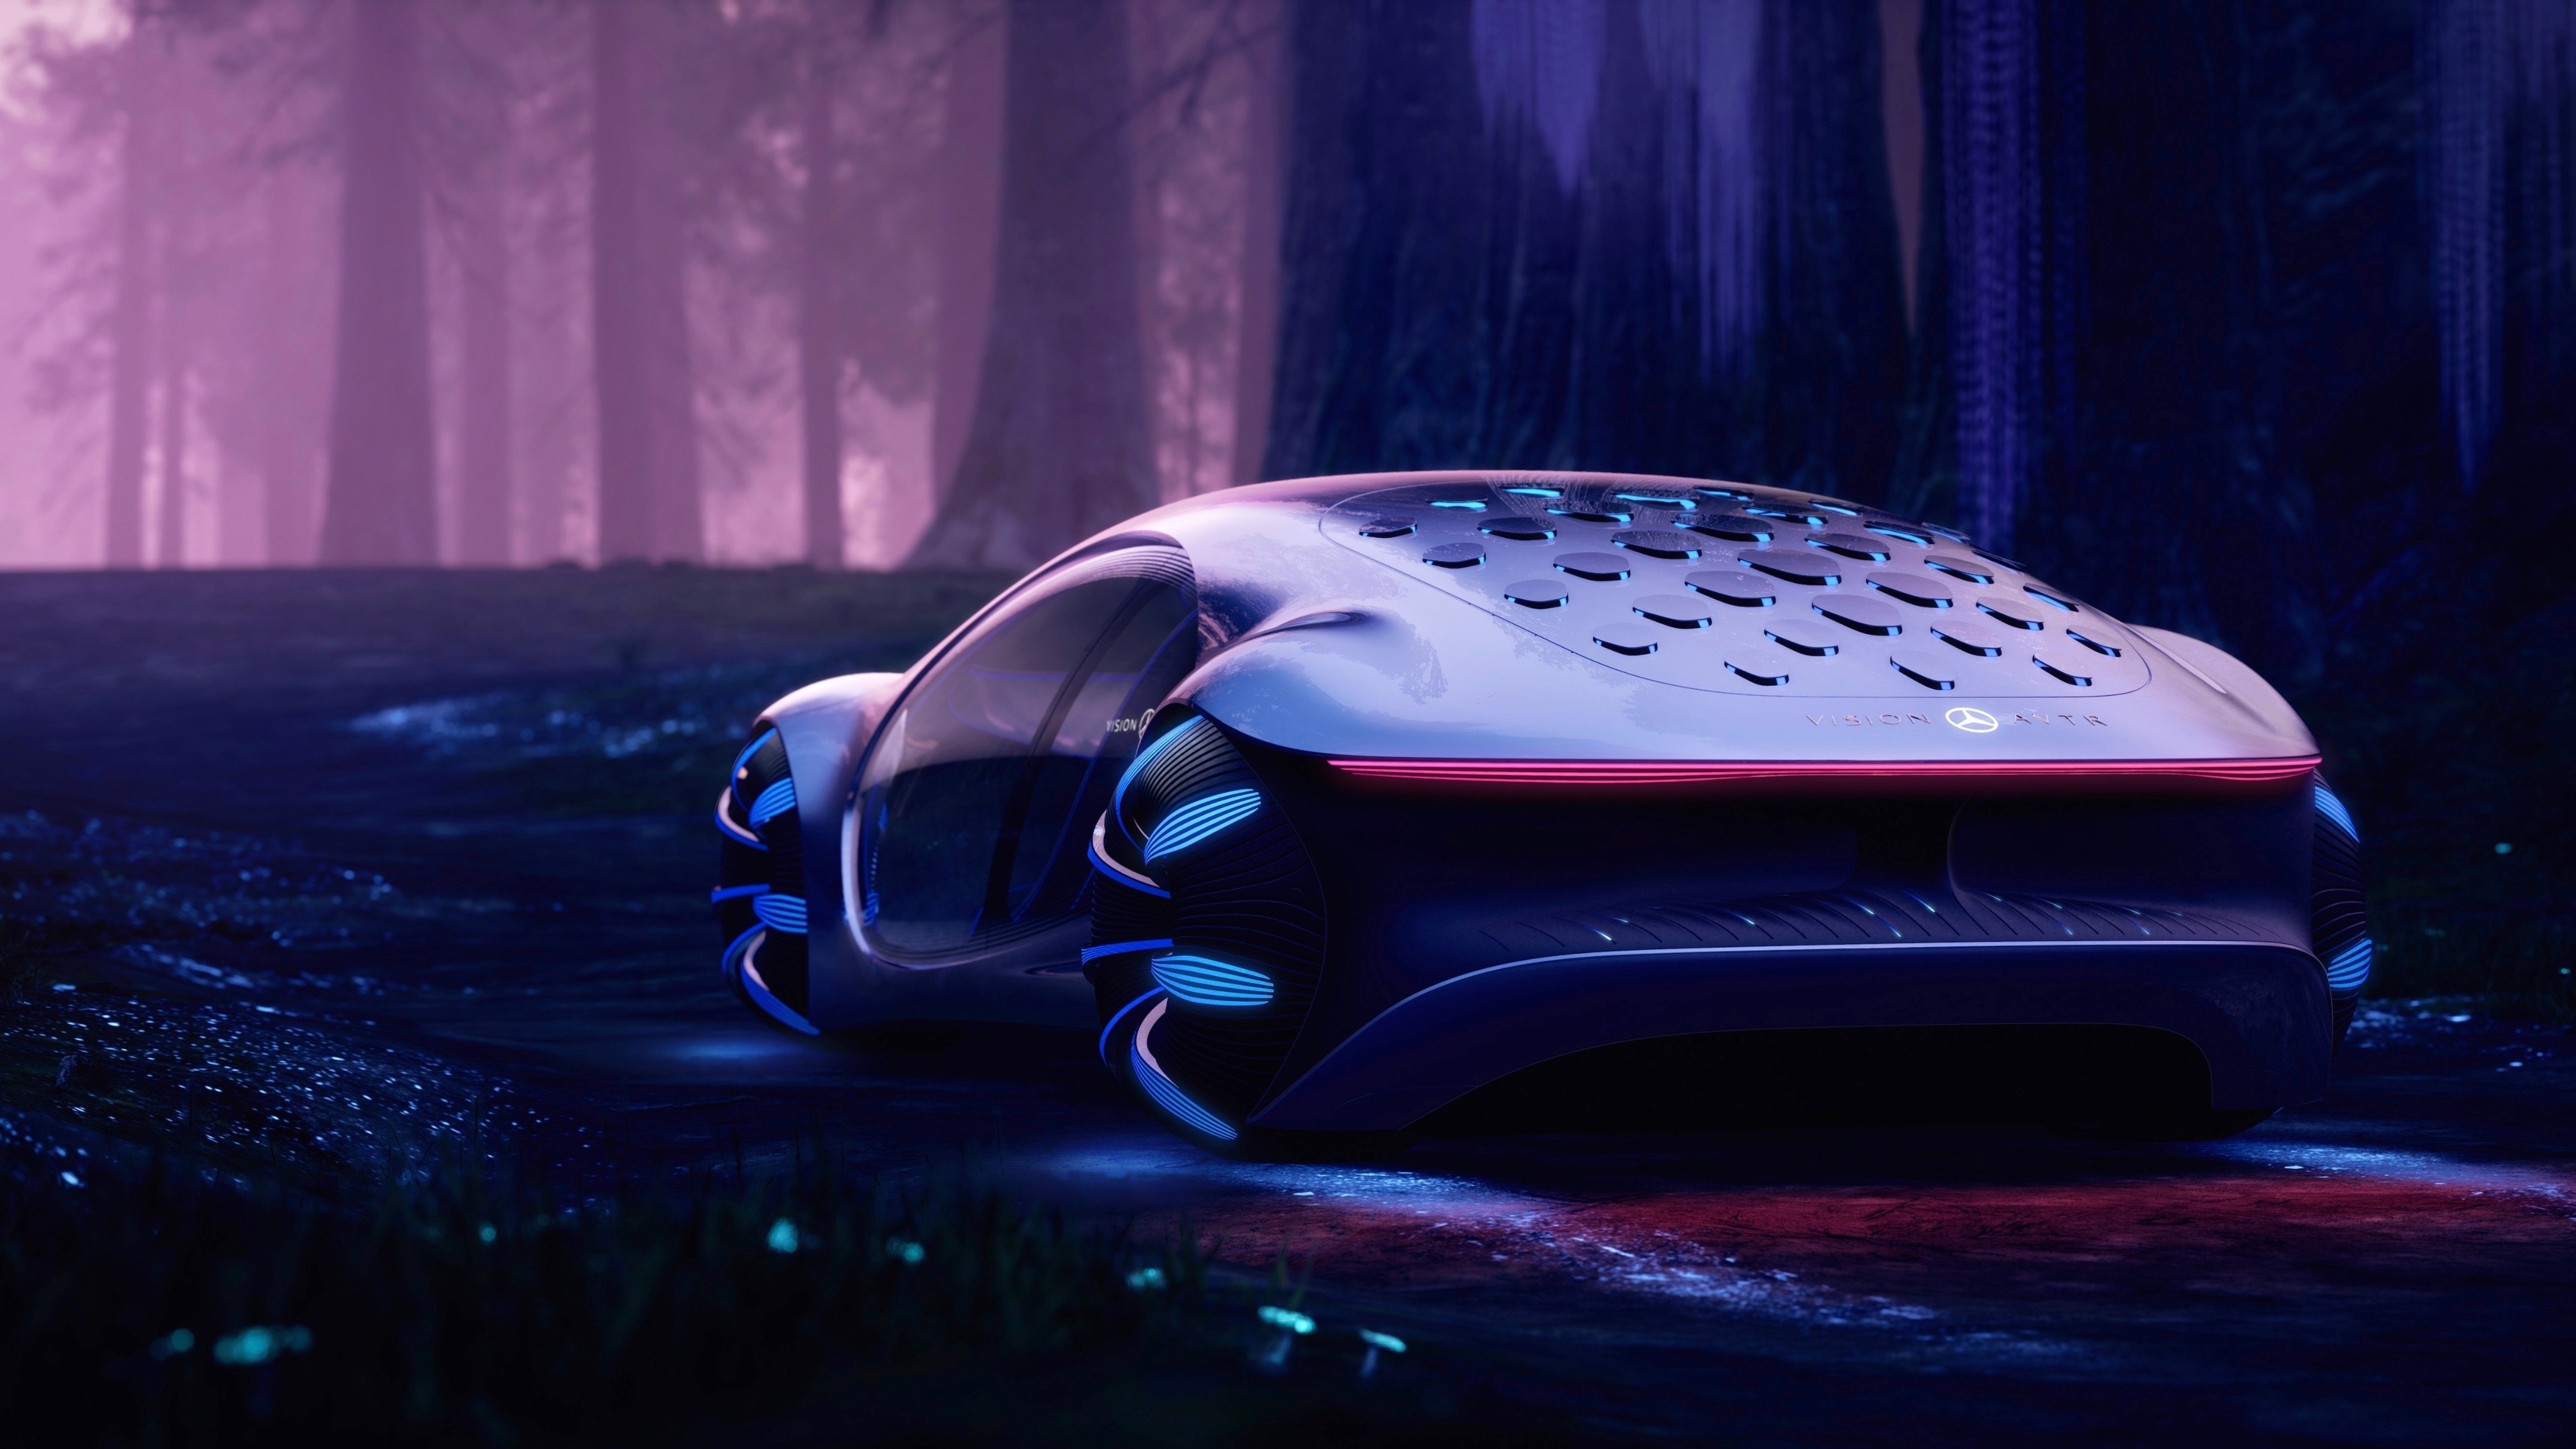 Mercedes Benz By AVATAR: The Name Of The Groundbreaking Concept Vehicle Stands Not Only For The Close Collaboration In Developing The Show Car Together With The AVATAR Team But Also